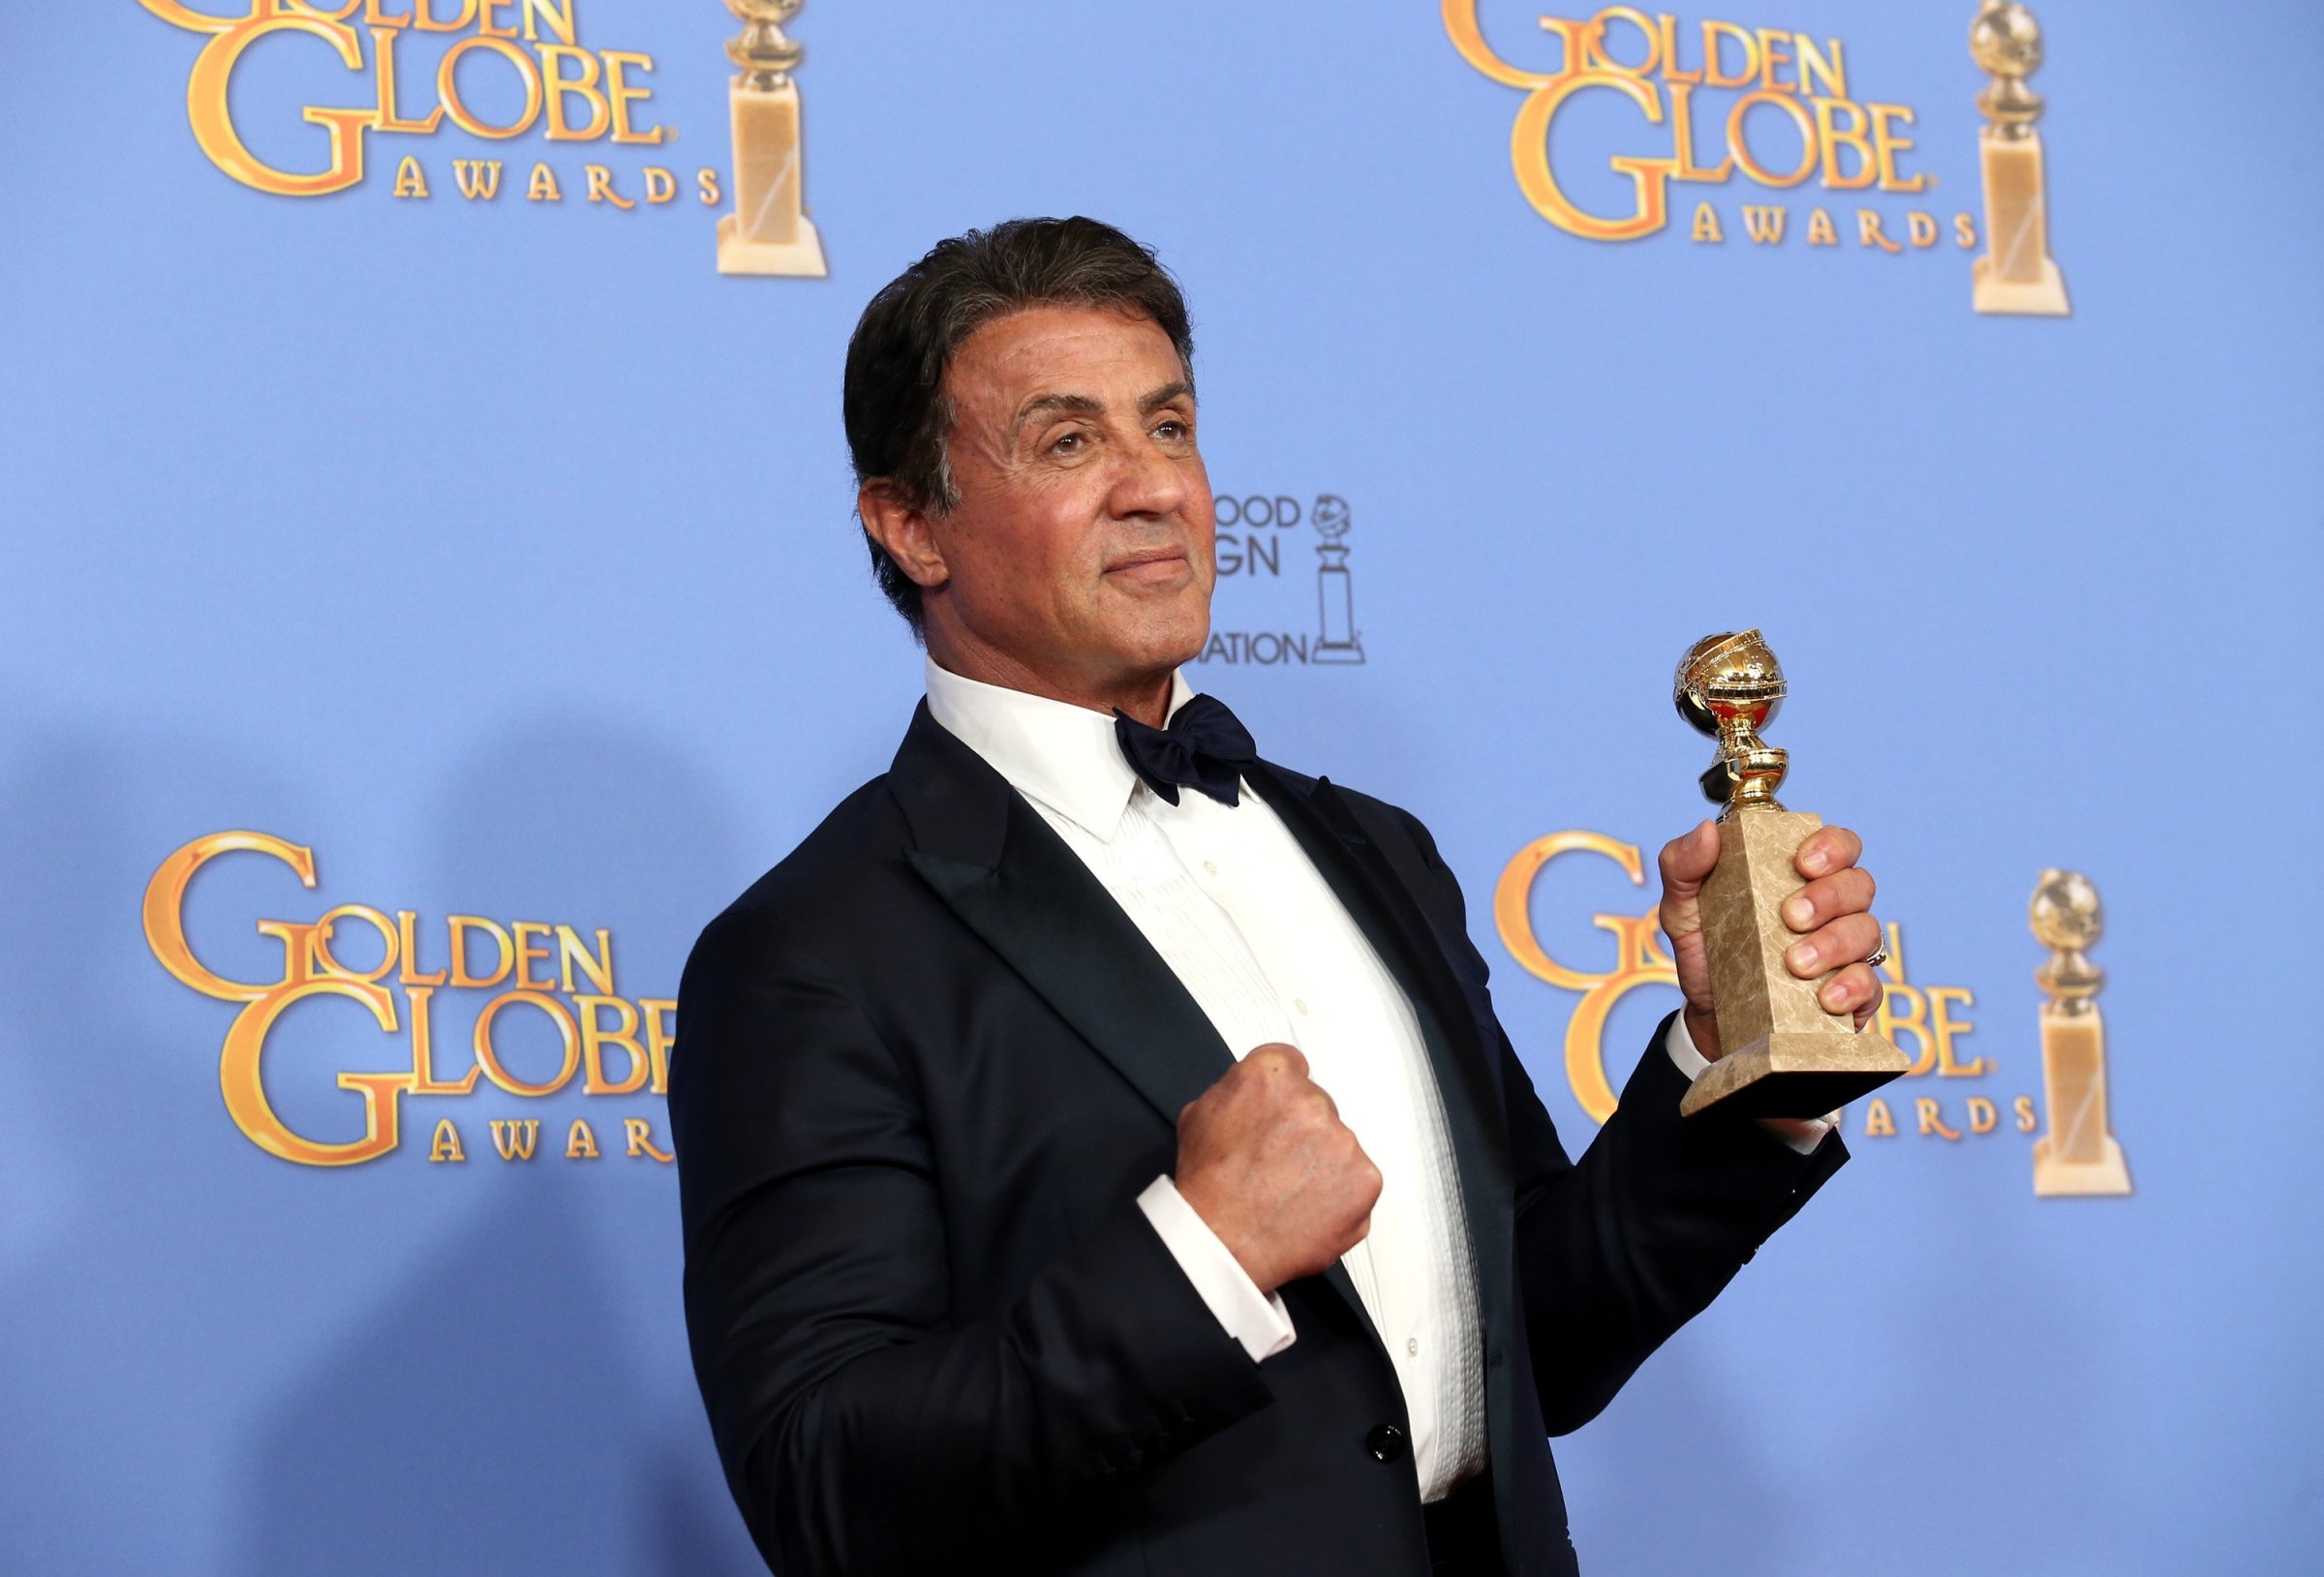 Sylvester Stallone at the 73rd Annual Golden Globe Awards, Press Room in Los Angeles on Jan.10, 2016.